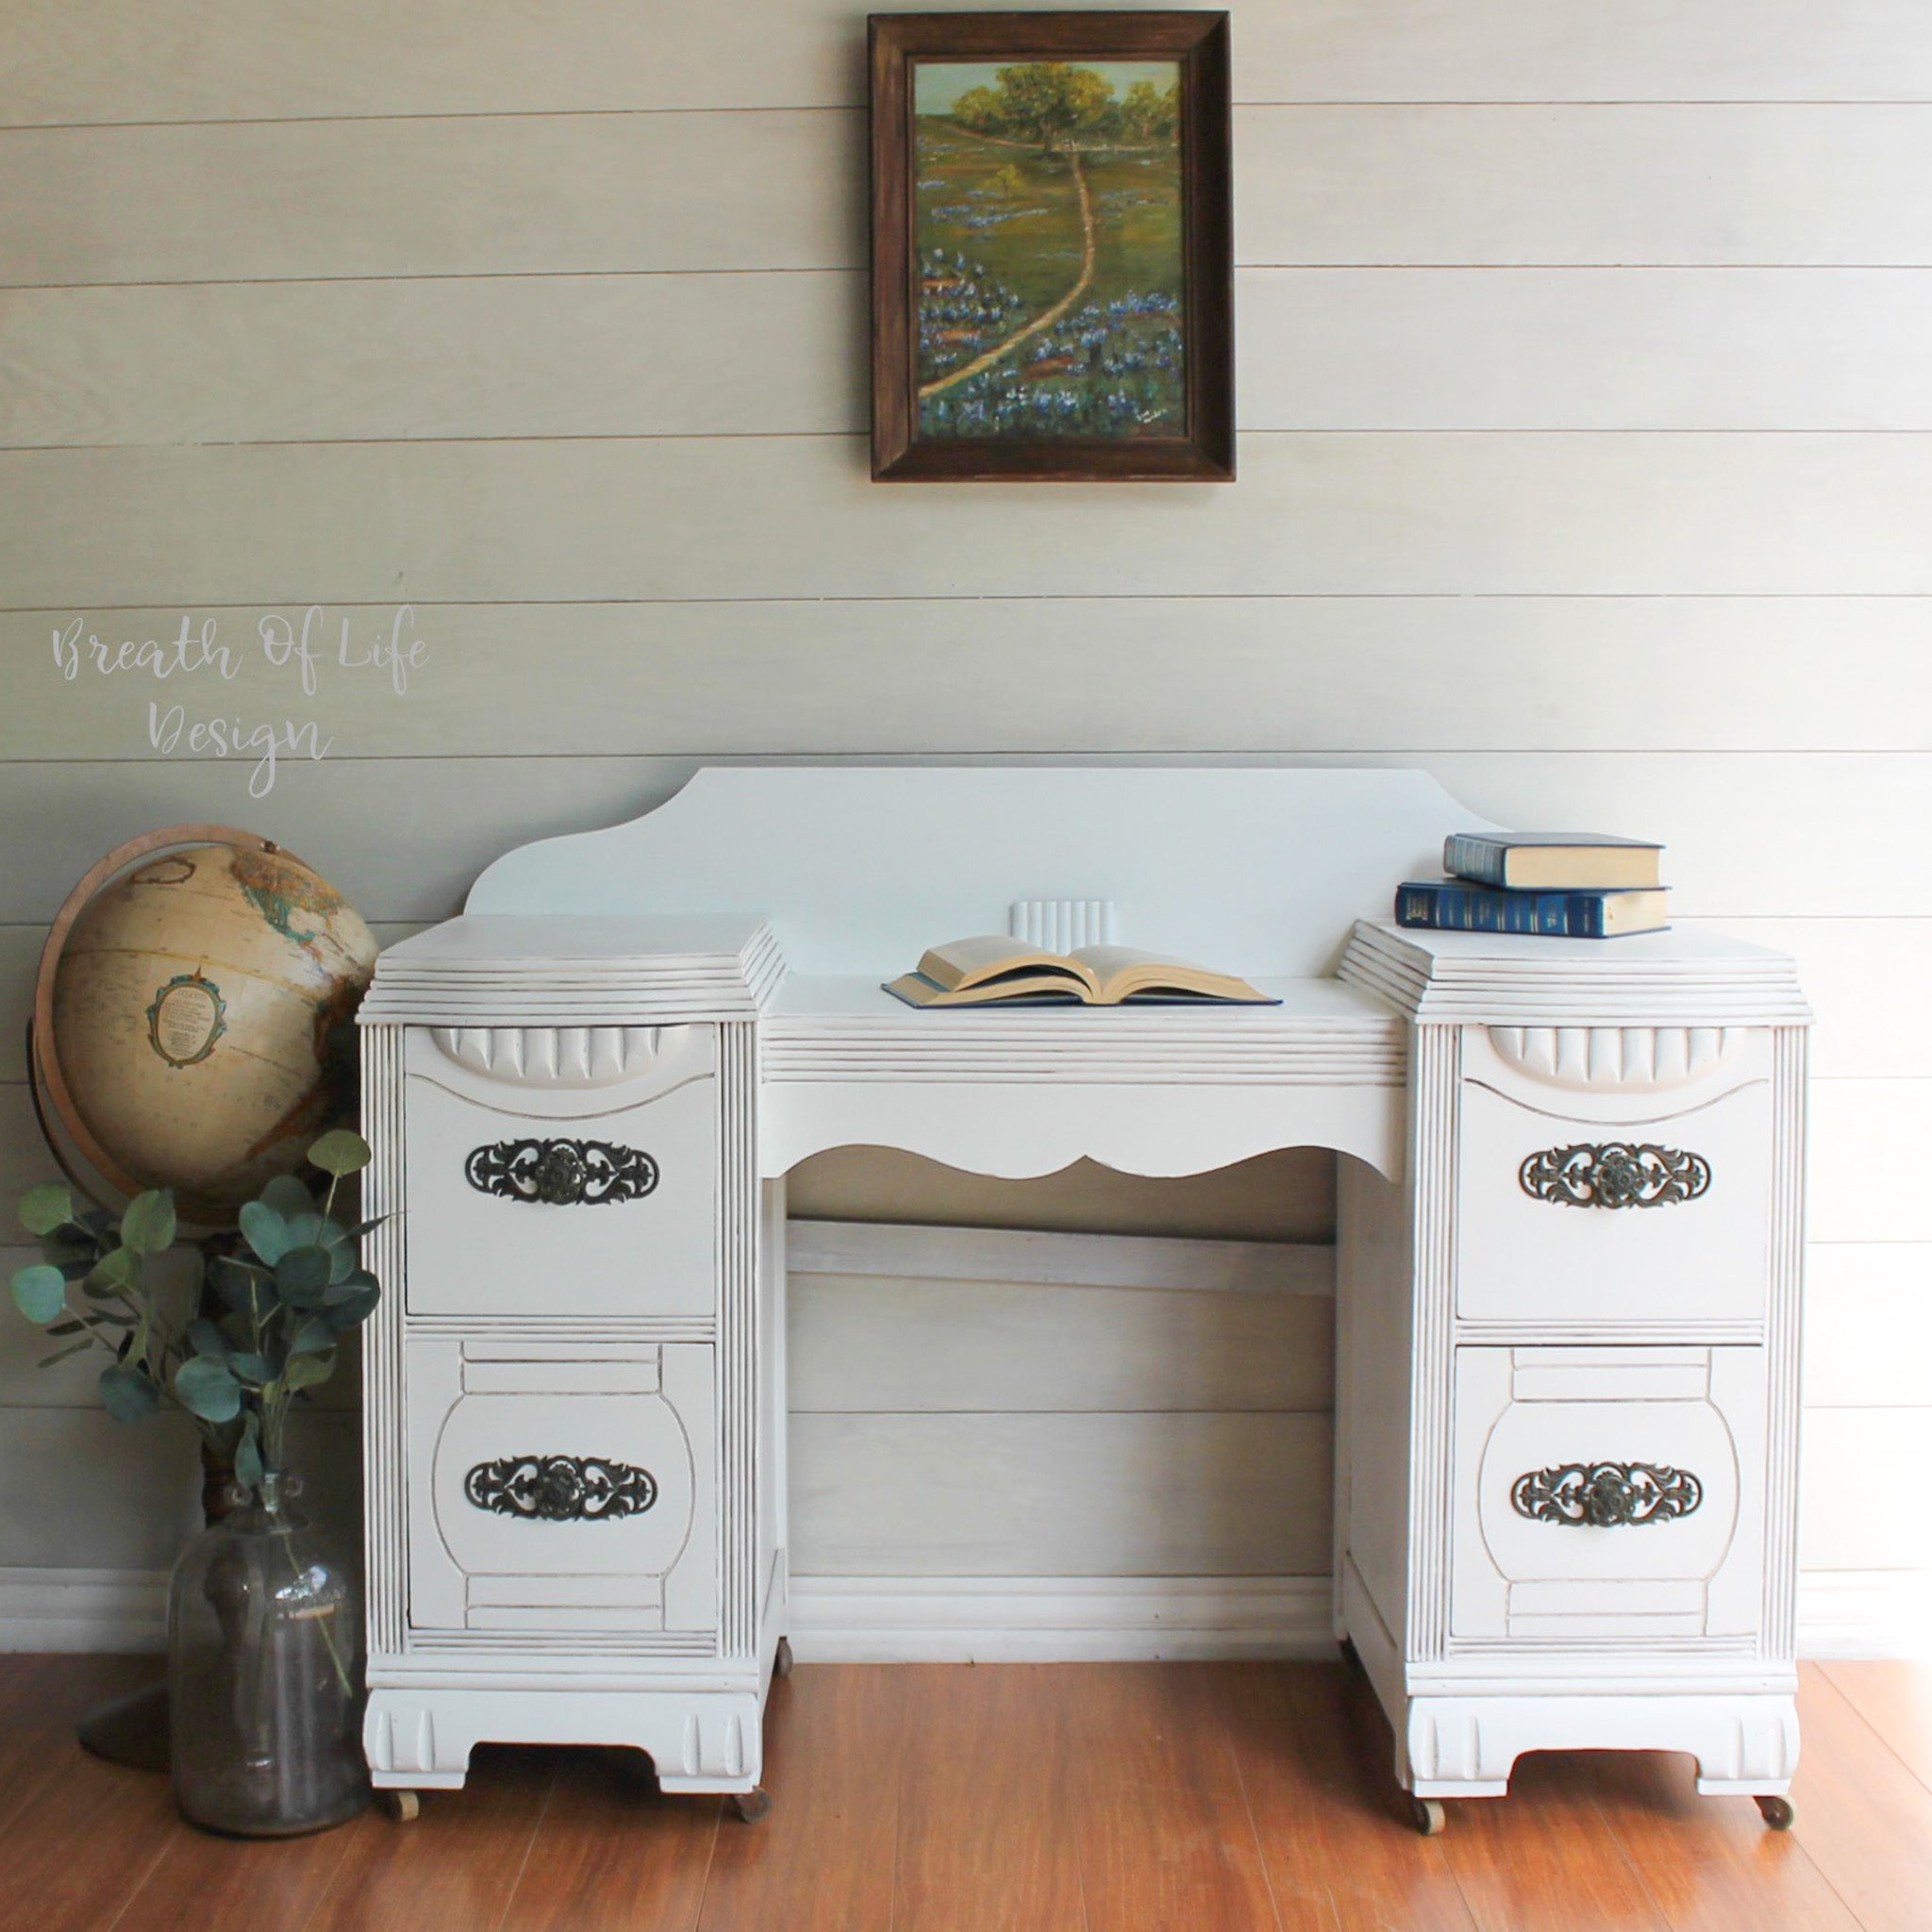 A vintage vanity refurbished by Breath of Life Design is painted in Dixie Belle's Cotton chalk mineral paint.